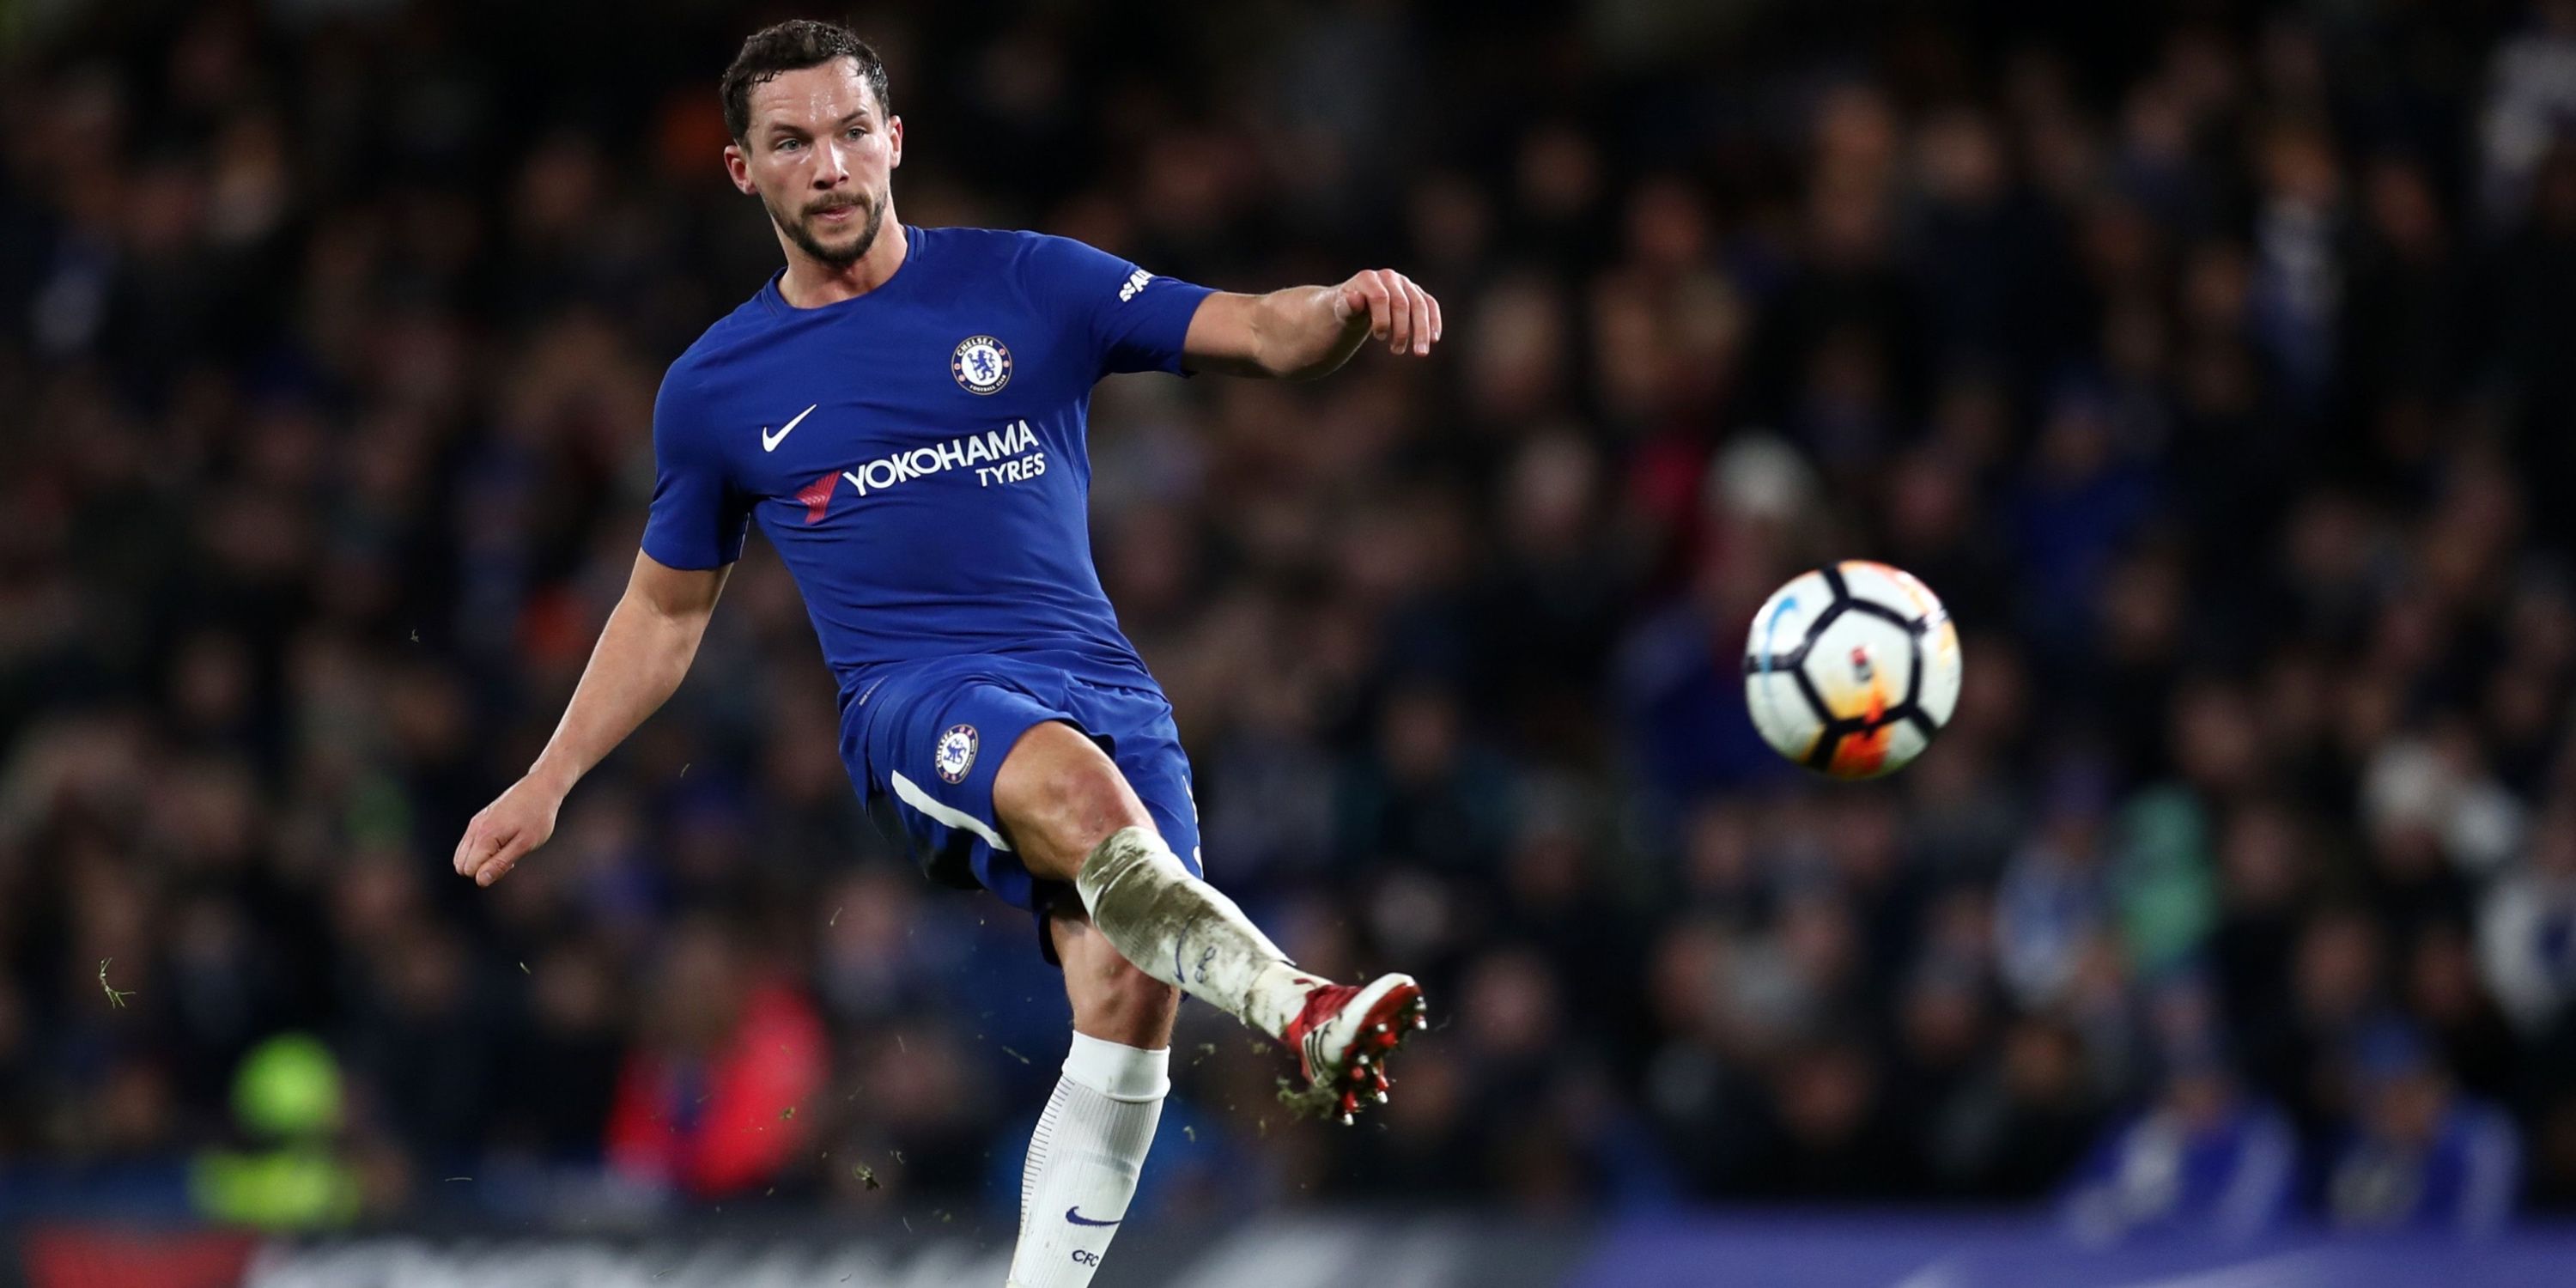 Chelsea Danny Drinkwater strikes the ball.